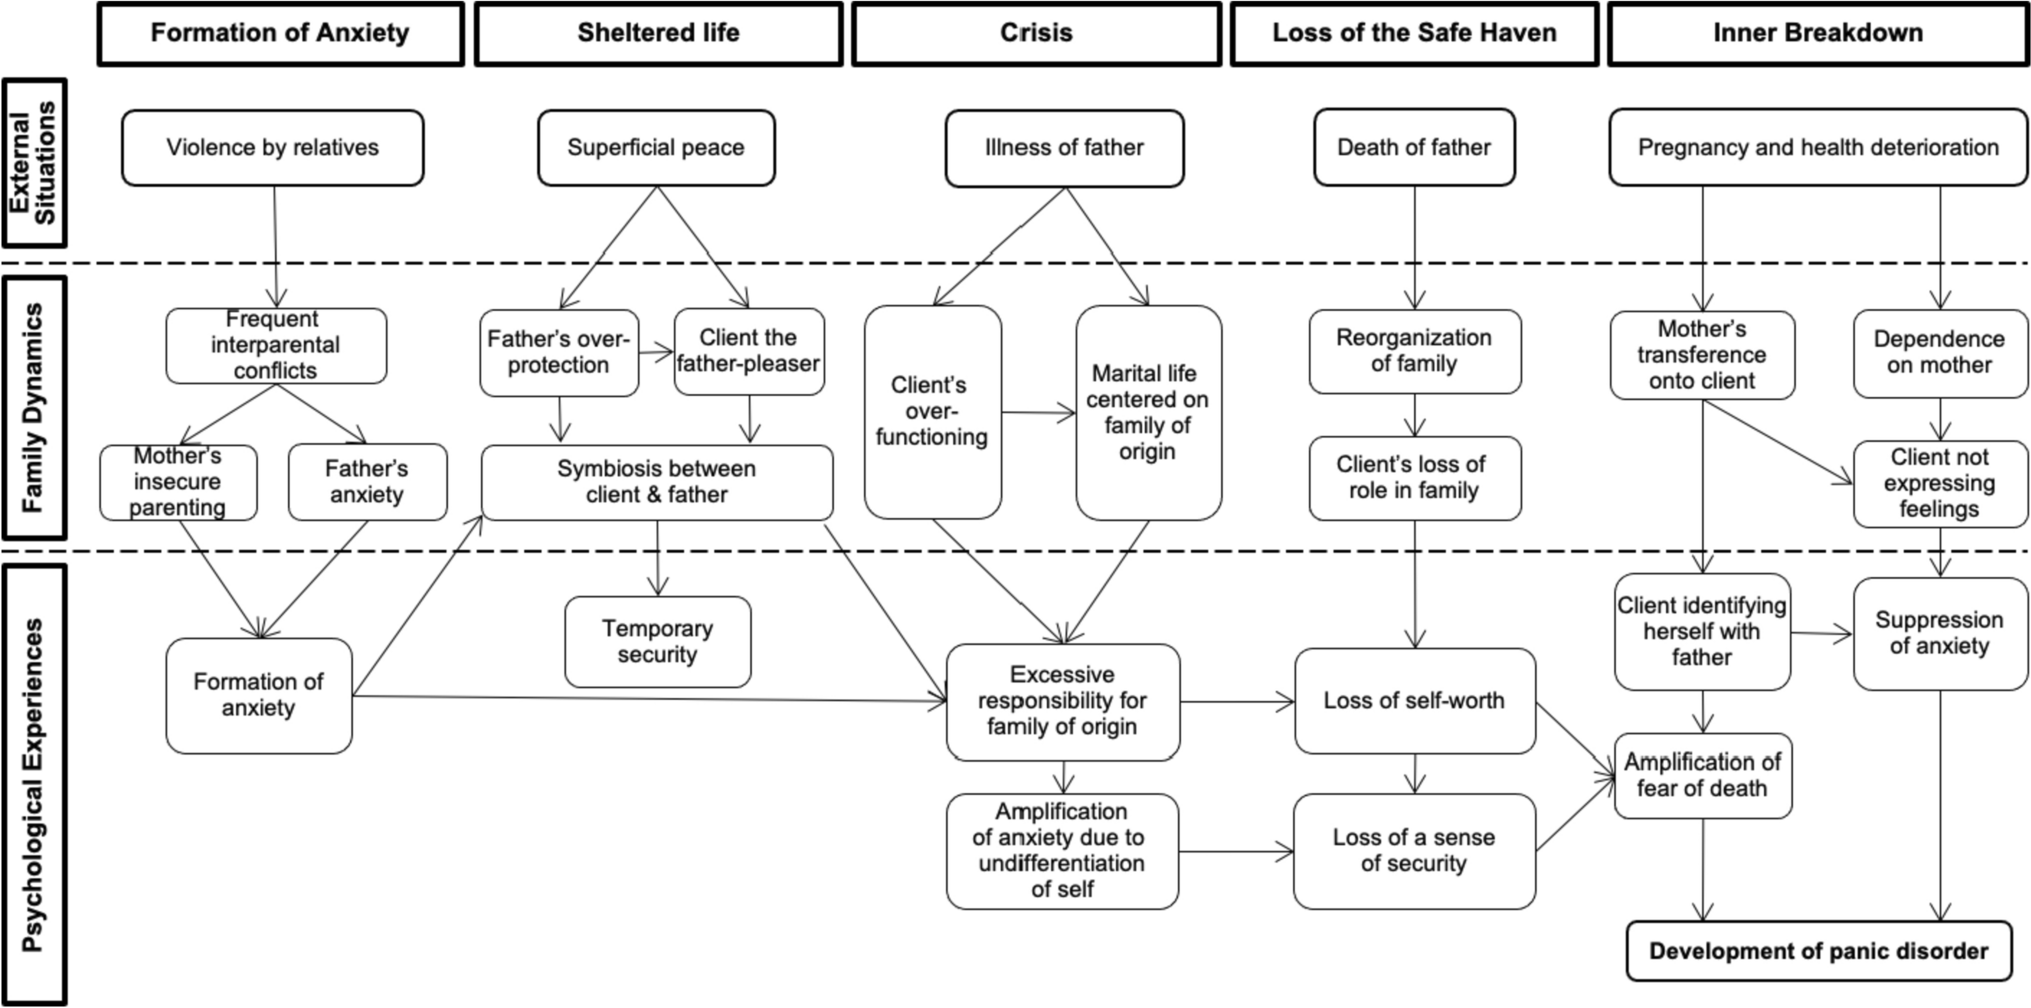 Psychological Dynamics in the Development Process of Panic Disorder: A Qualitative Study on a Family Therapy Case